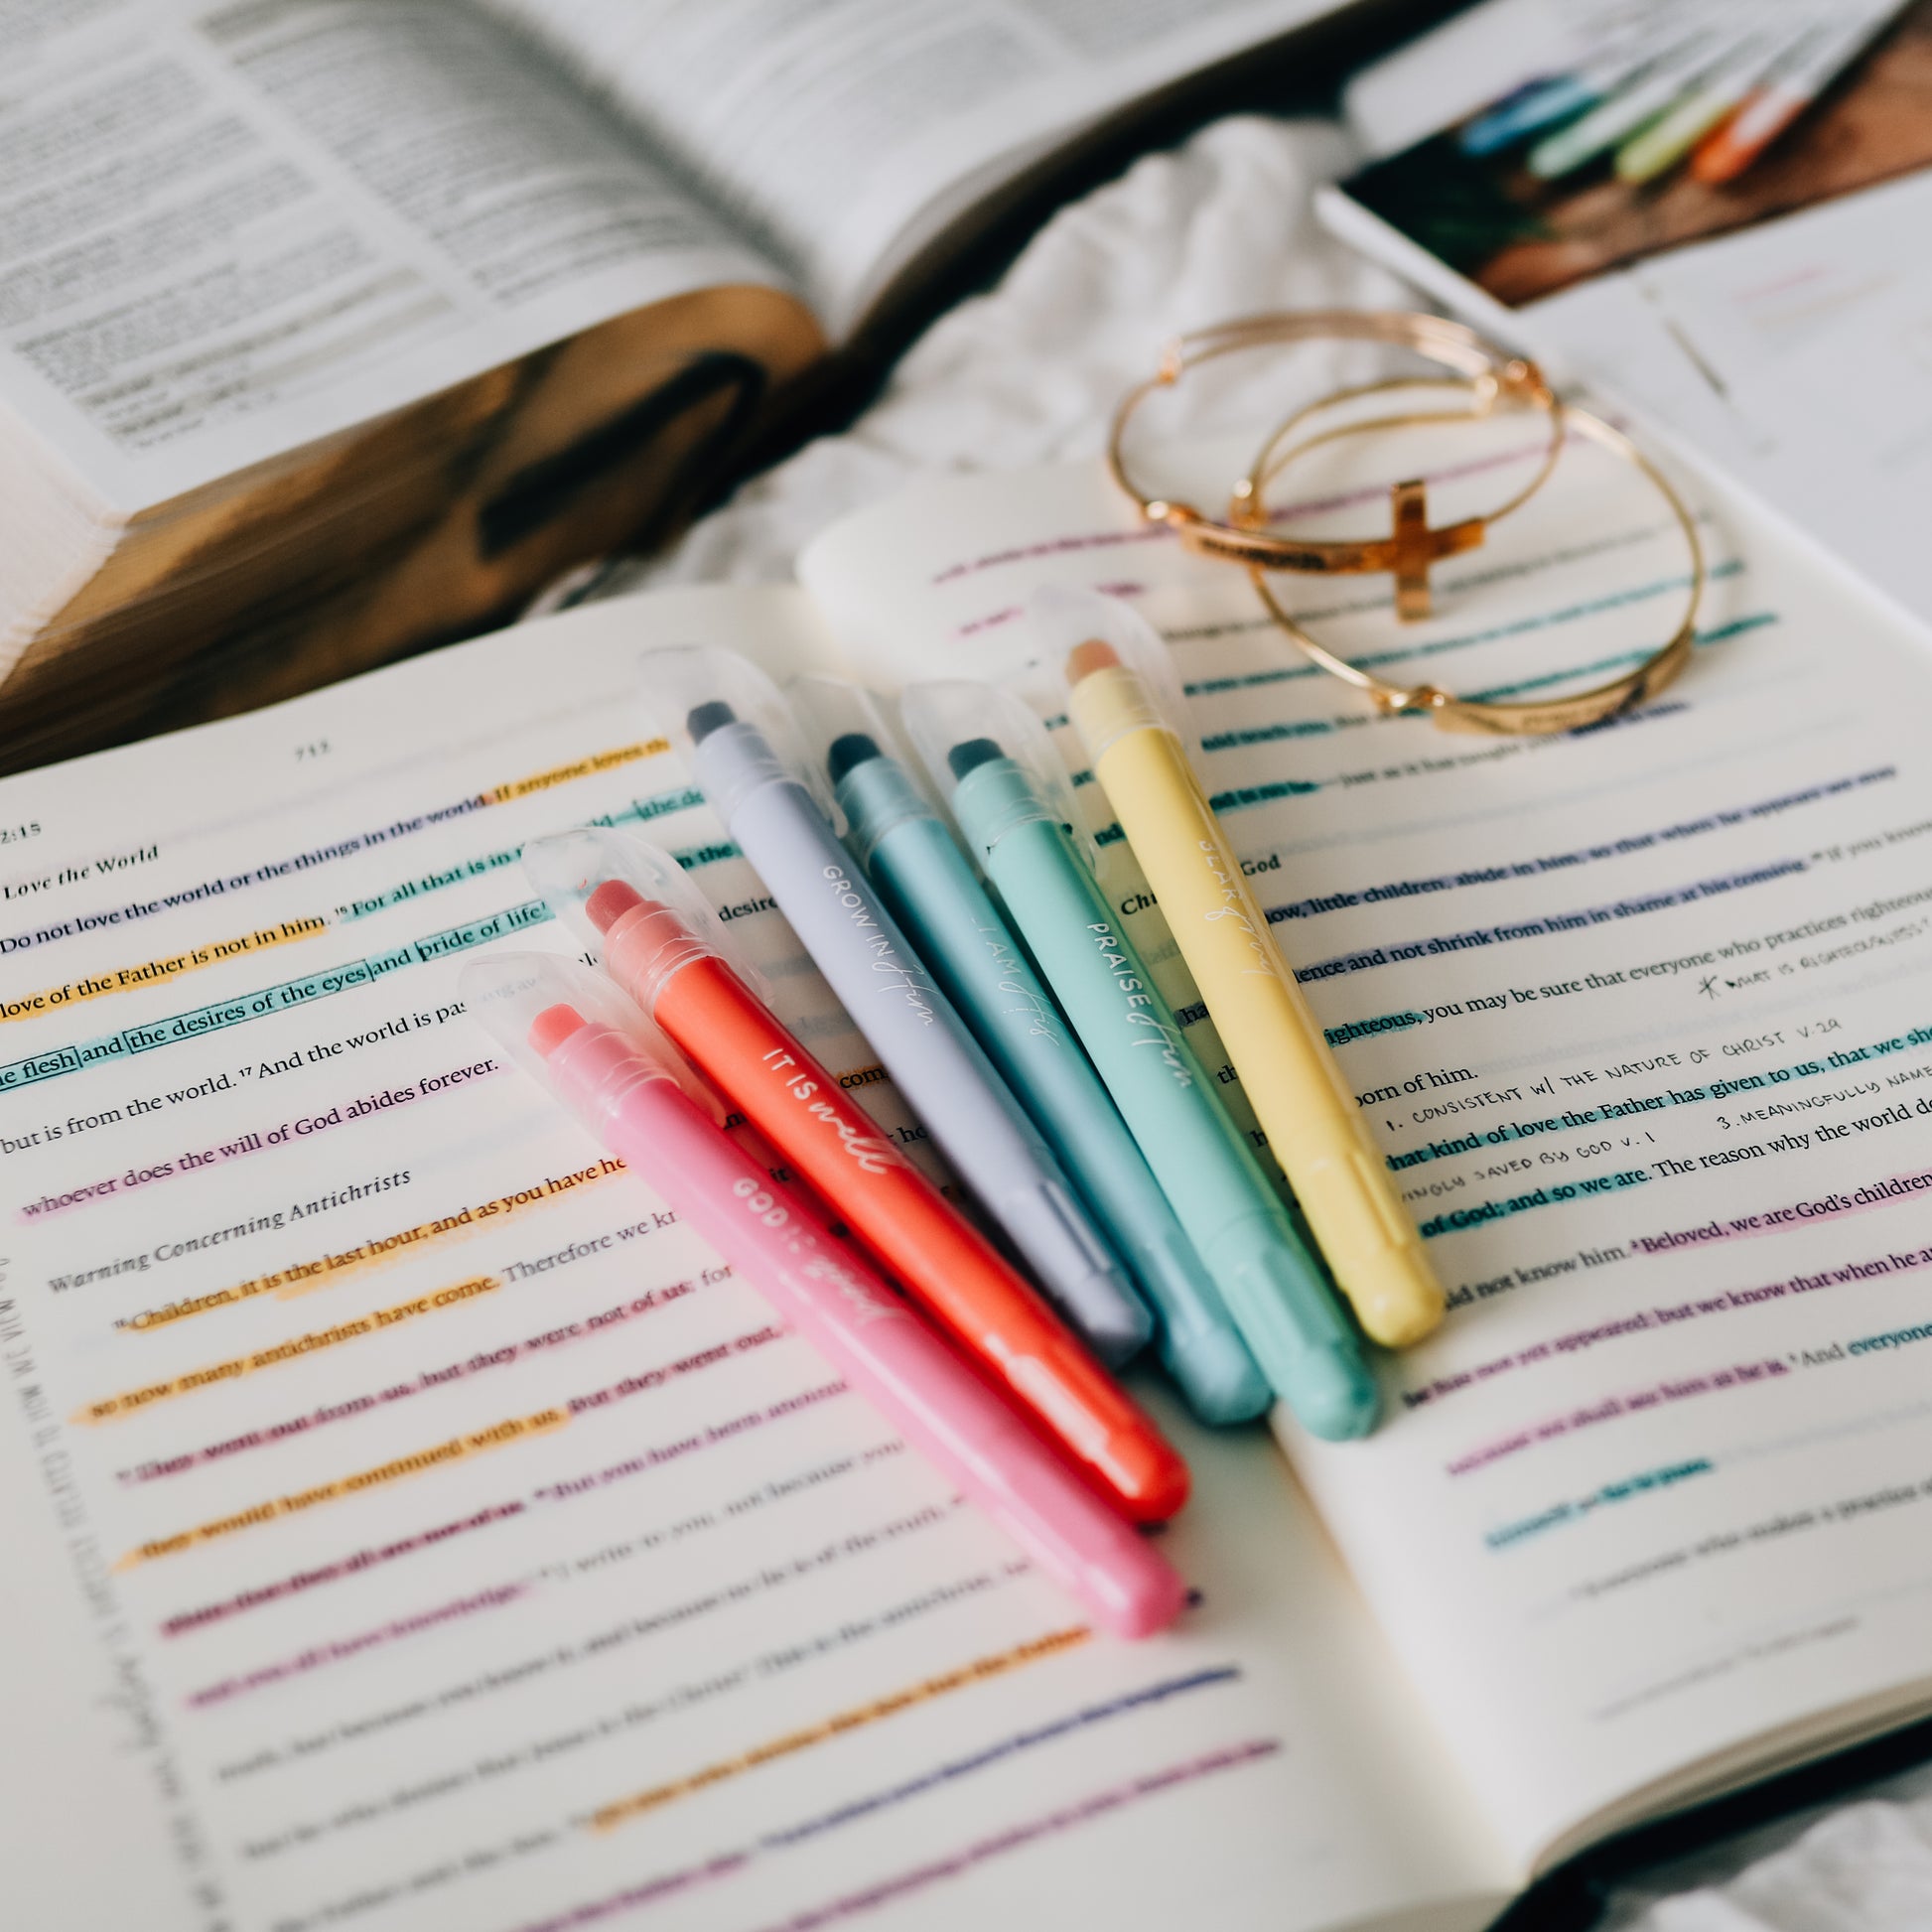 10 Best Bible Highlighters Reviewed and Rated in 2023 - Art Ltd